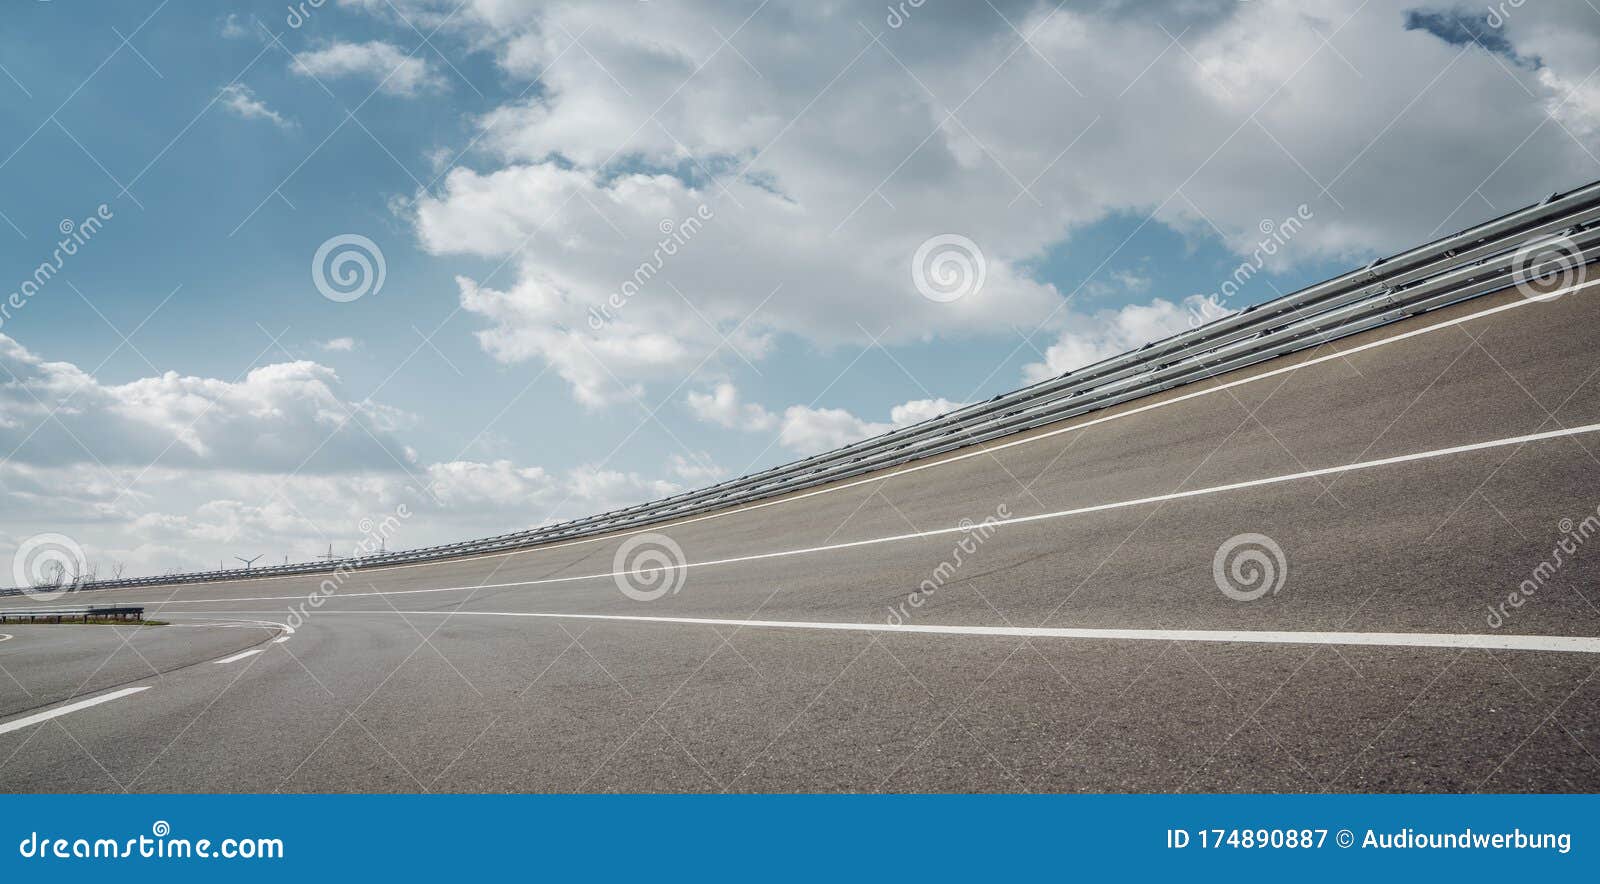 race car / motorcycle racetrack on a sunny day